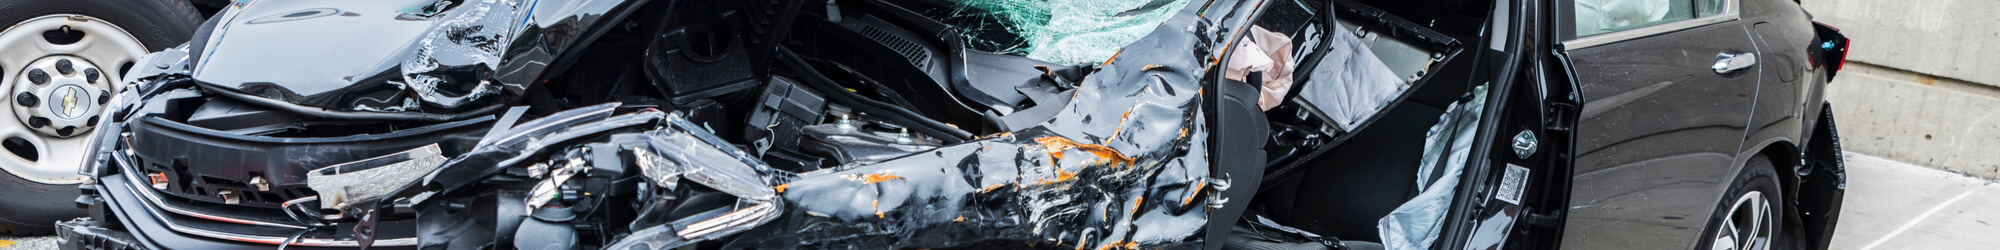 drunk driving accident attorney in Pittsburgh